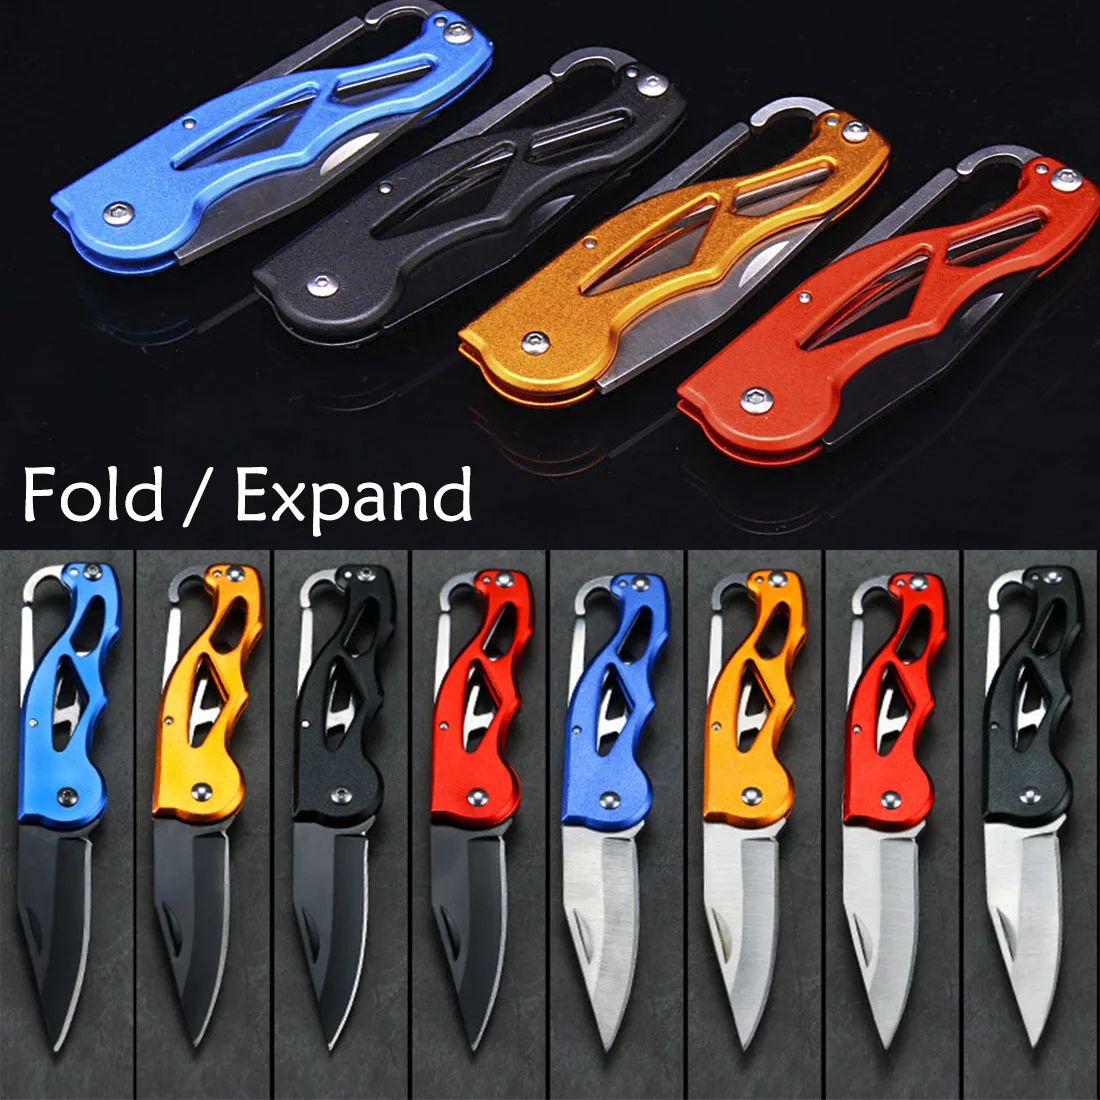 

Survival Rescue Folding Knife Camping Tool Mini Peeler Keychain Tactical Hunting Outdoor Tools Portable Pocket Multifunction